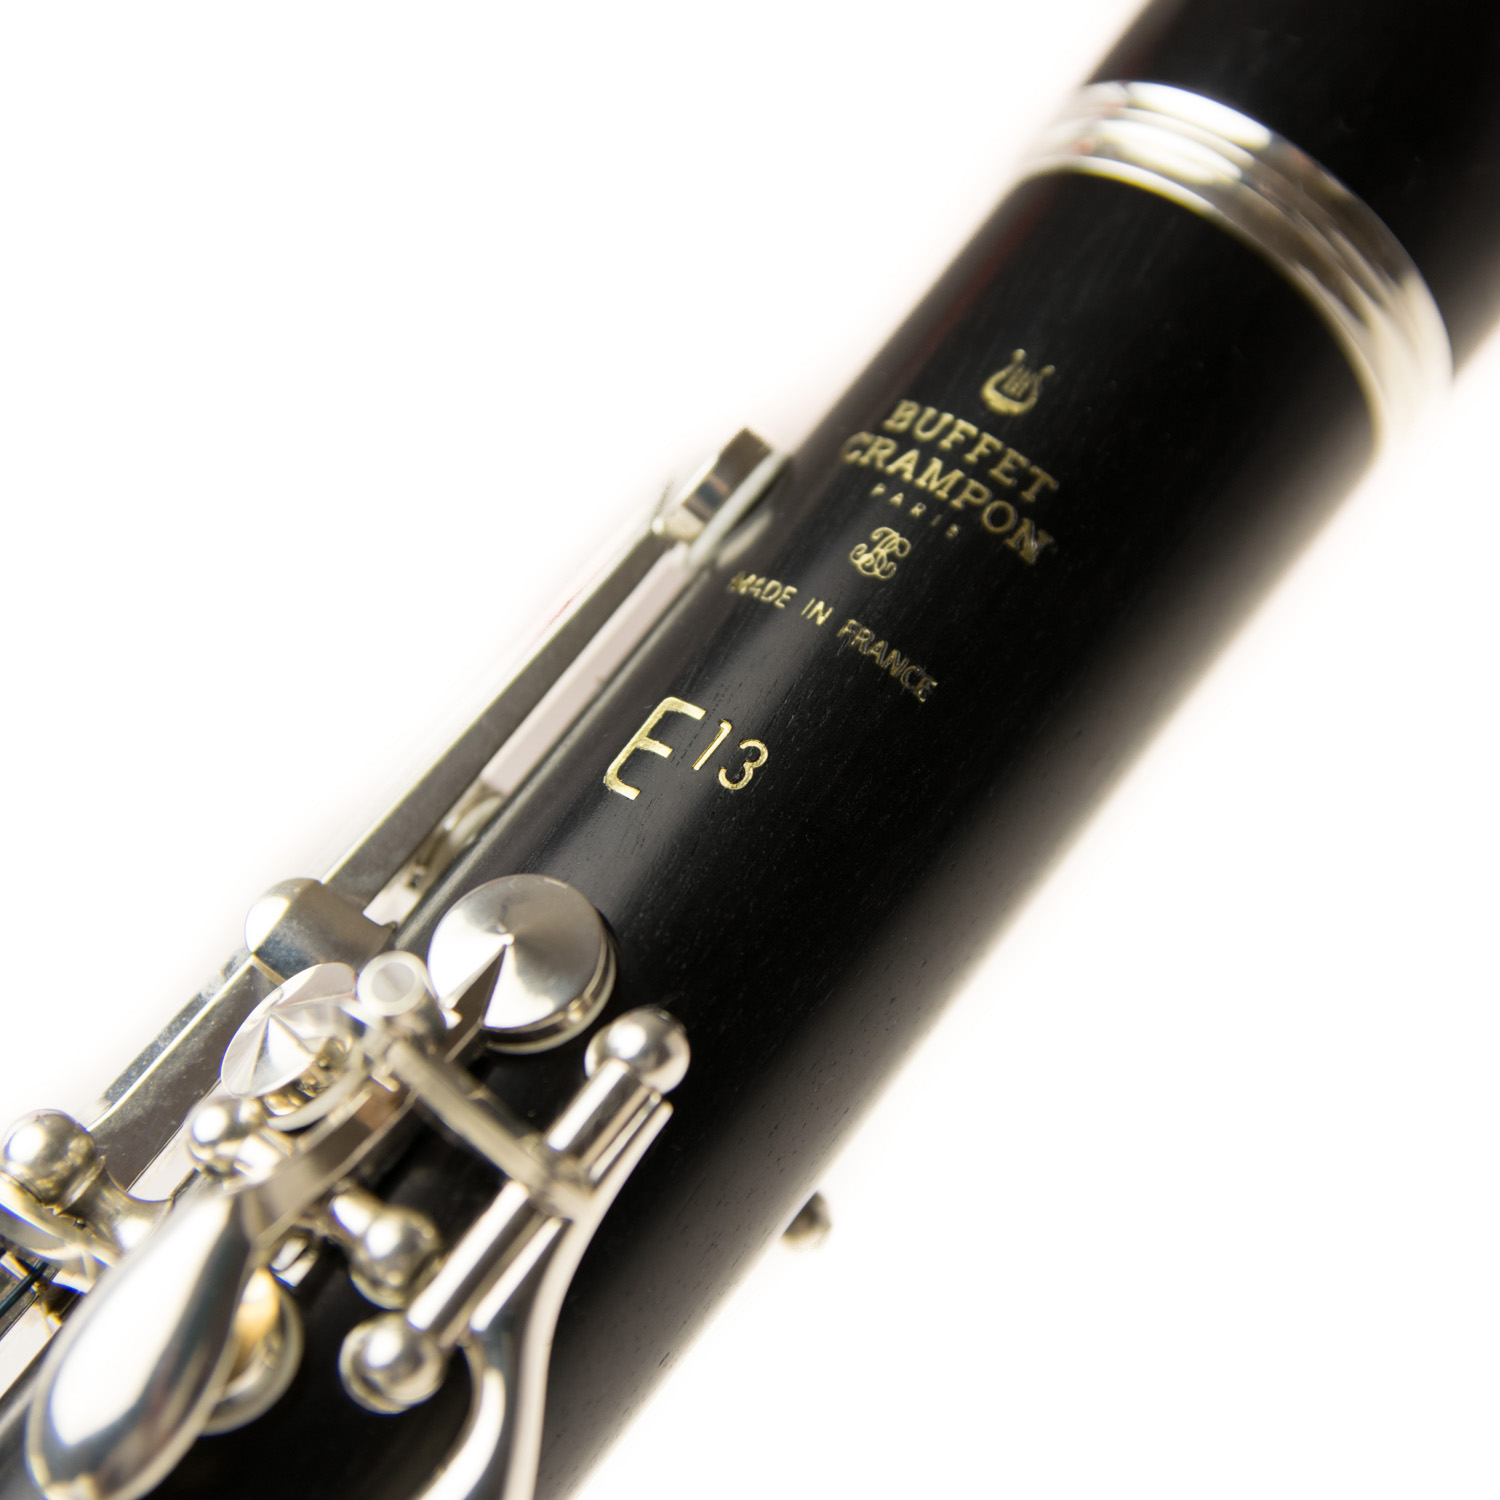 Buffet Crampon Bb Clarinet - E13L with Left Eb Lever